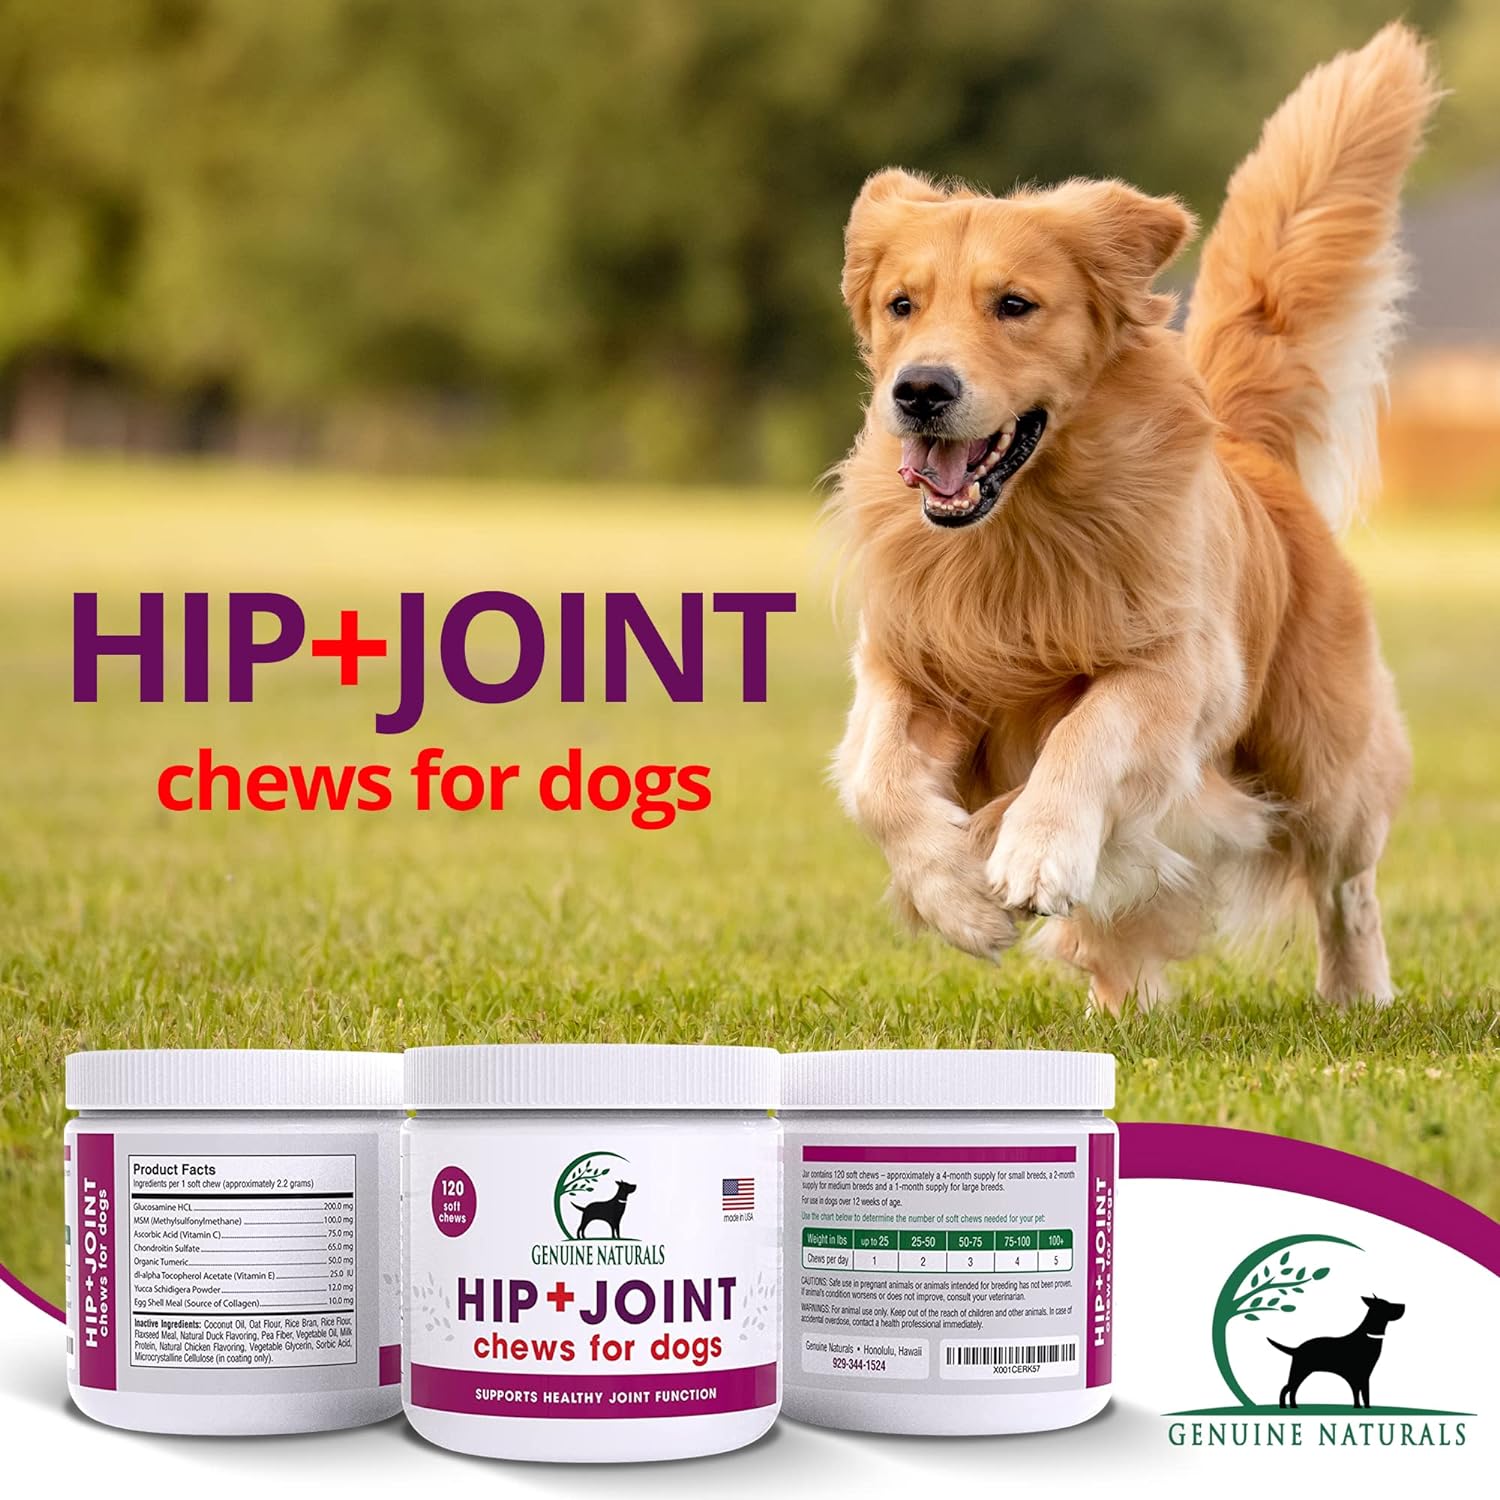 Genuine Naturals Hip and Joint Supplement for Dogs - Glucosamine Chondroitin, MSM, Organic Turmeric Soft Chews, Dog Vitamins, Supports Healthy Joint Function and Helps with Pain Relief,120 Count : Pet Supplies